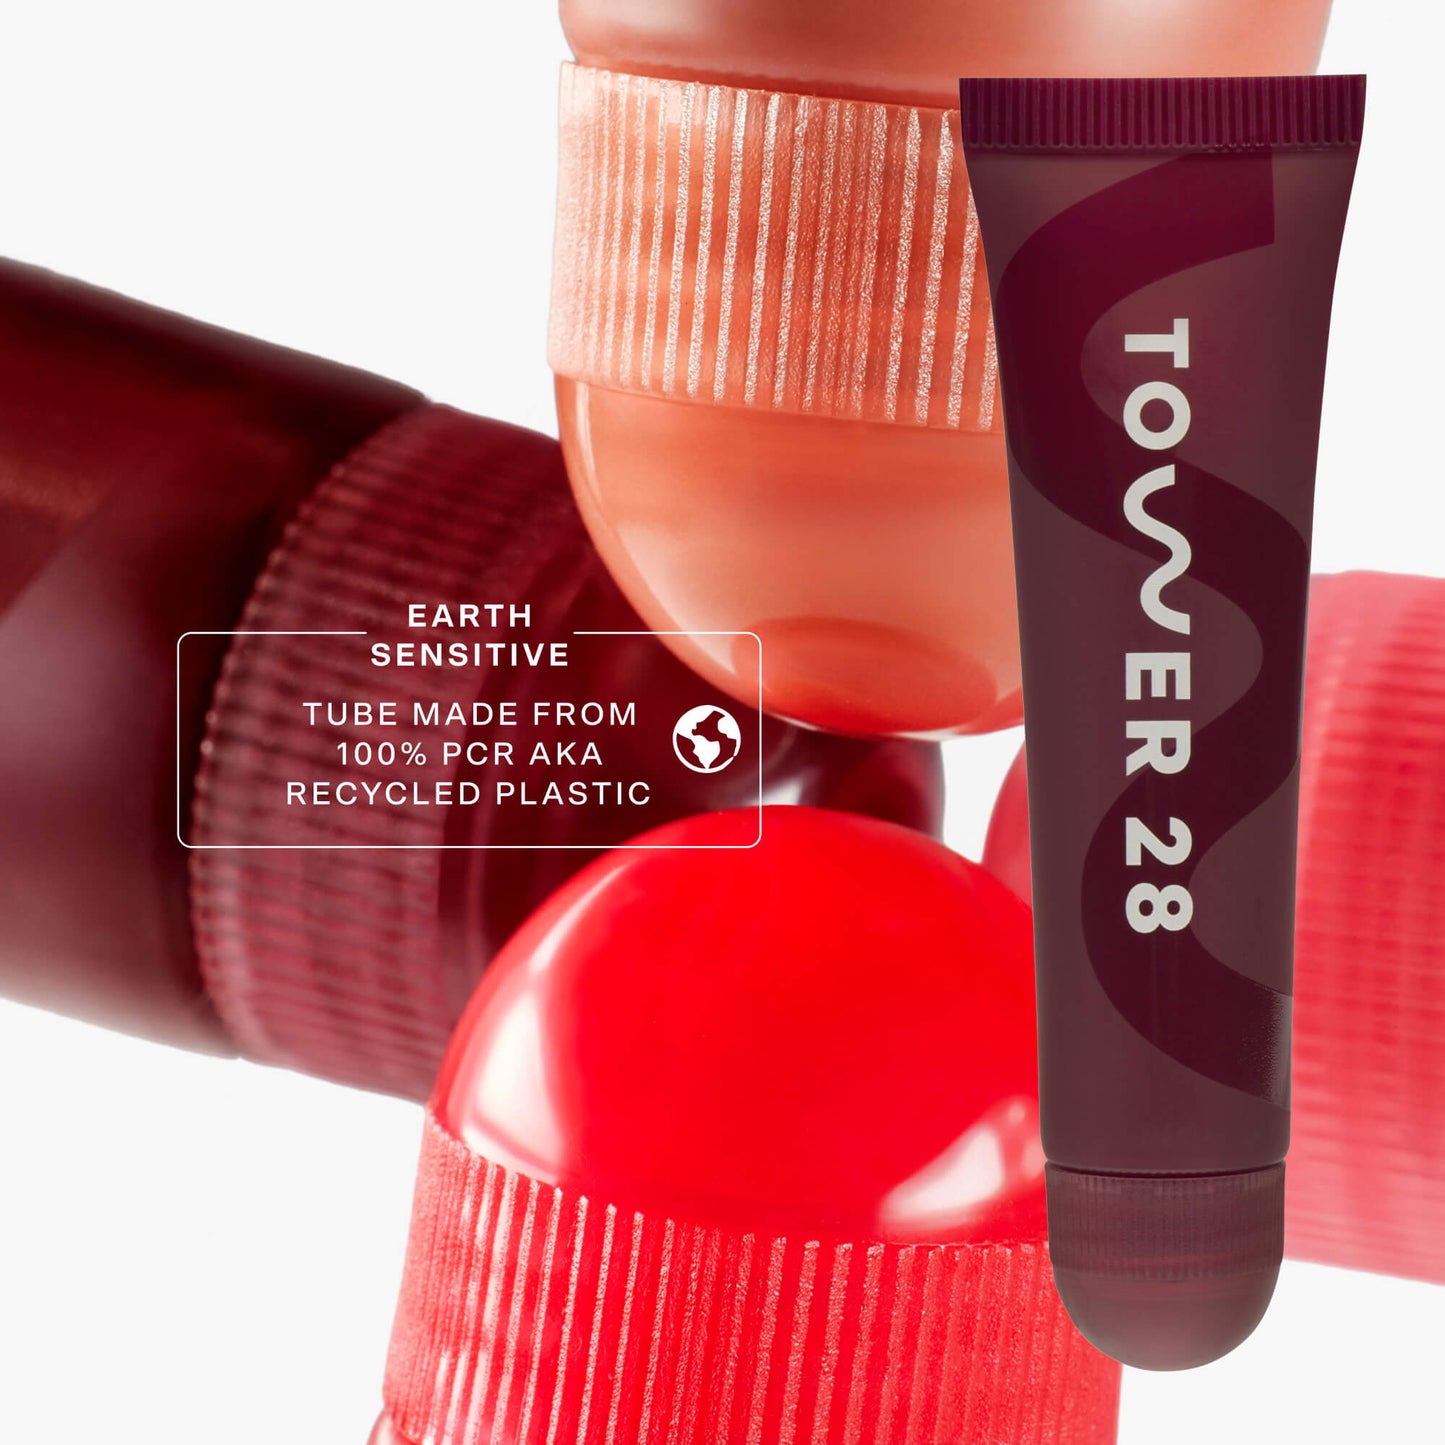 [Tower 28 Beauty LipSoftie™ Lip Treatment in Ube Vanilla has 100% recycled plastic packaging.]